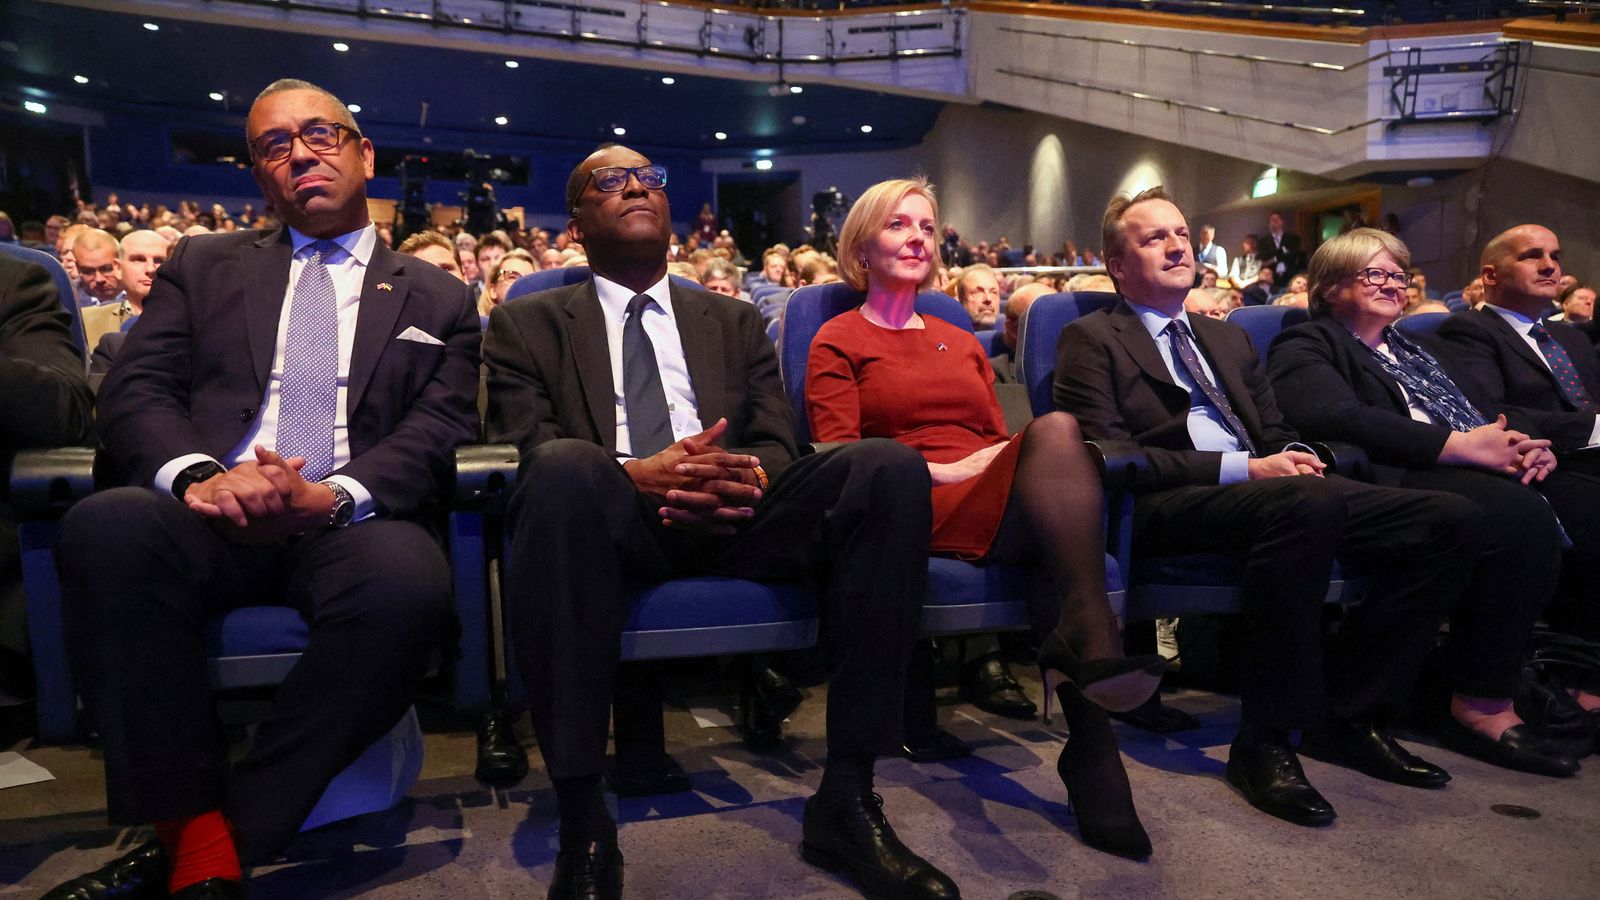 Tory conference is shrouded in gloom – has Liz Truss already sealed her own fate?